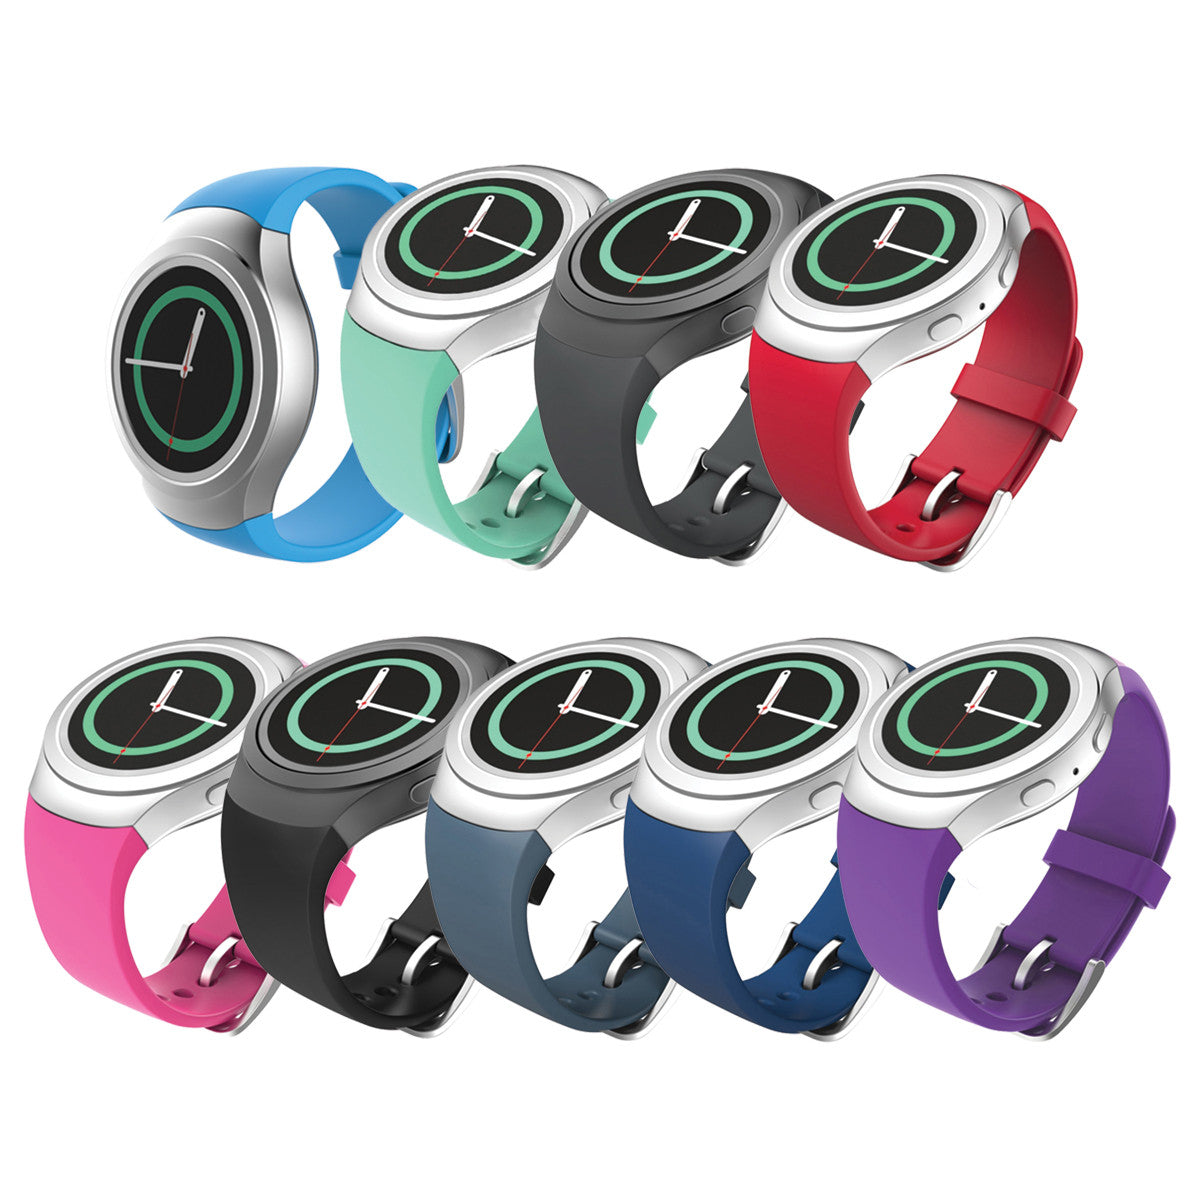 Samsung Gear S2 Bands Replacement Straps   